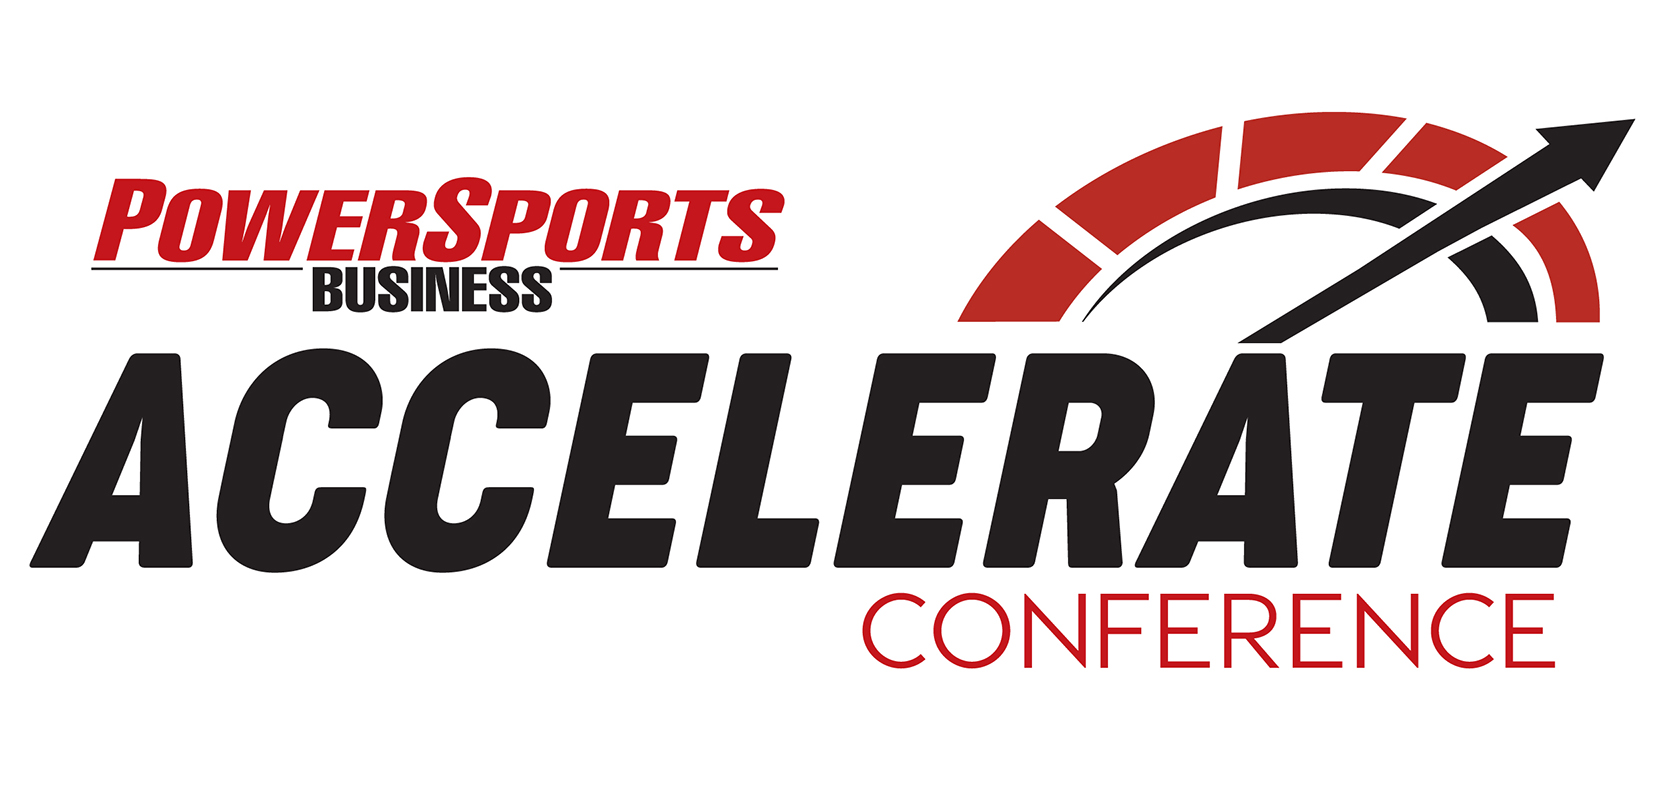 Complete Powersports Business Accelerate Conference schedule